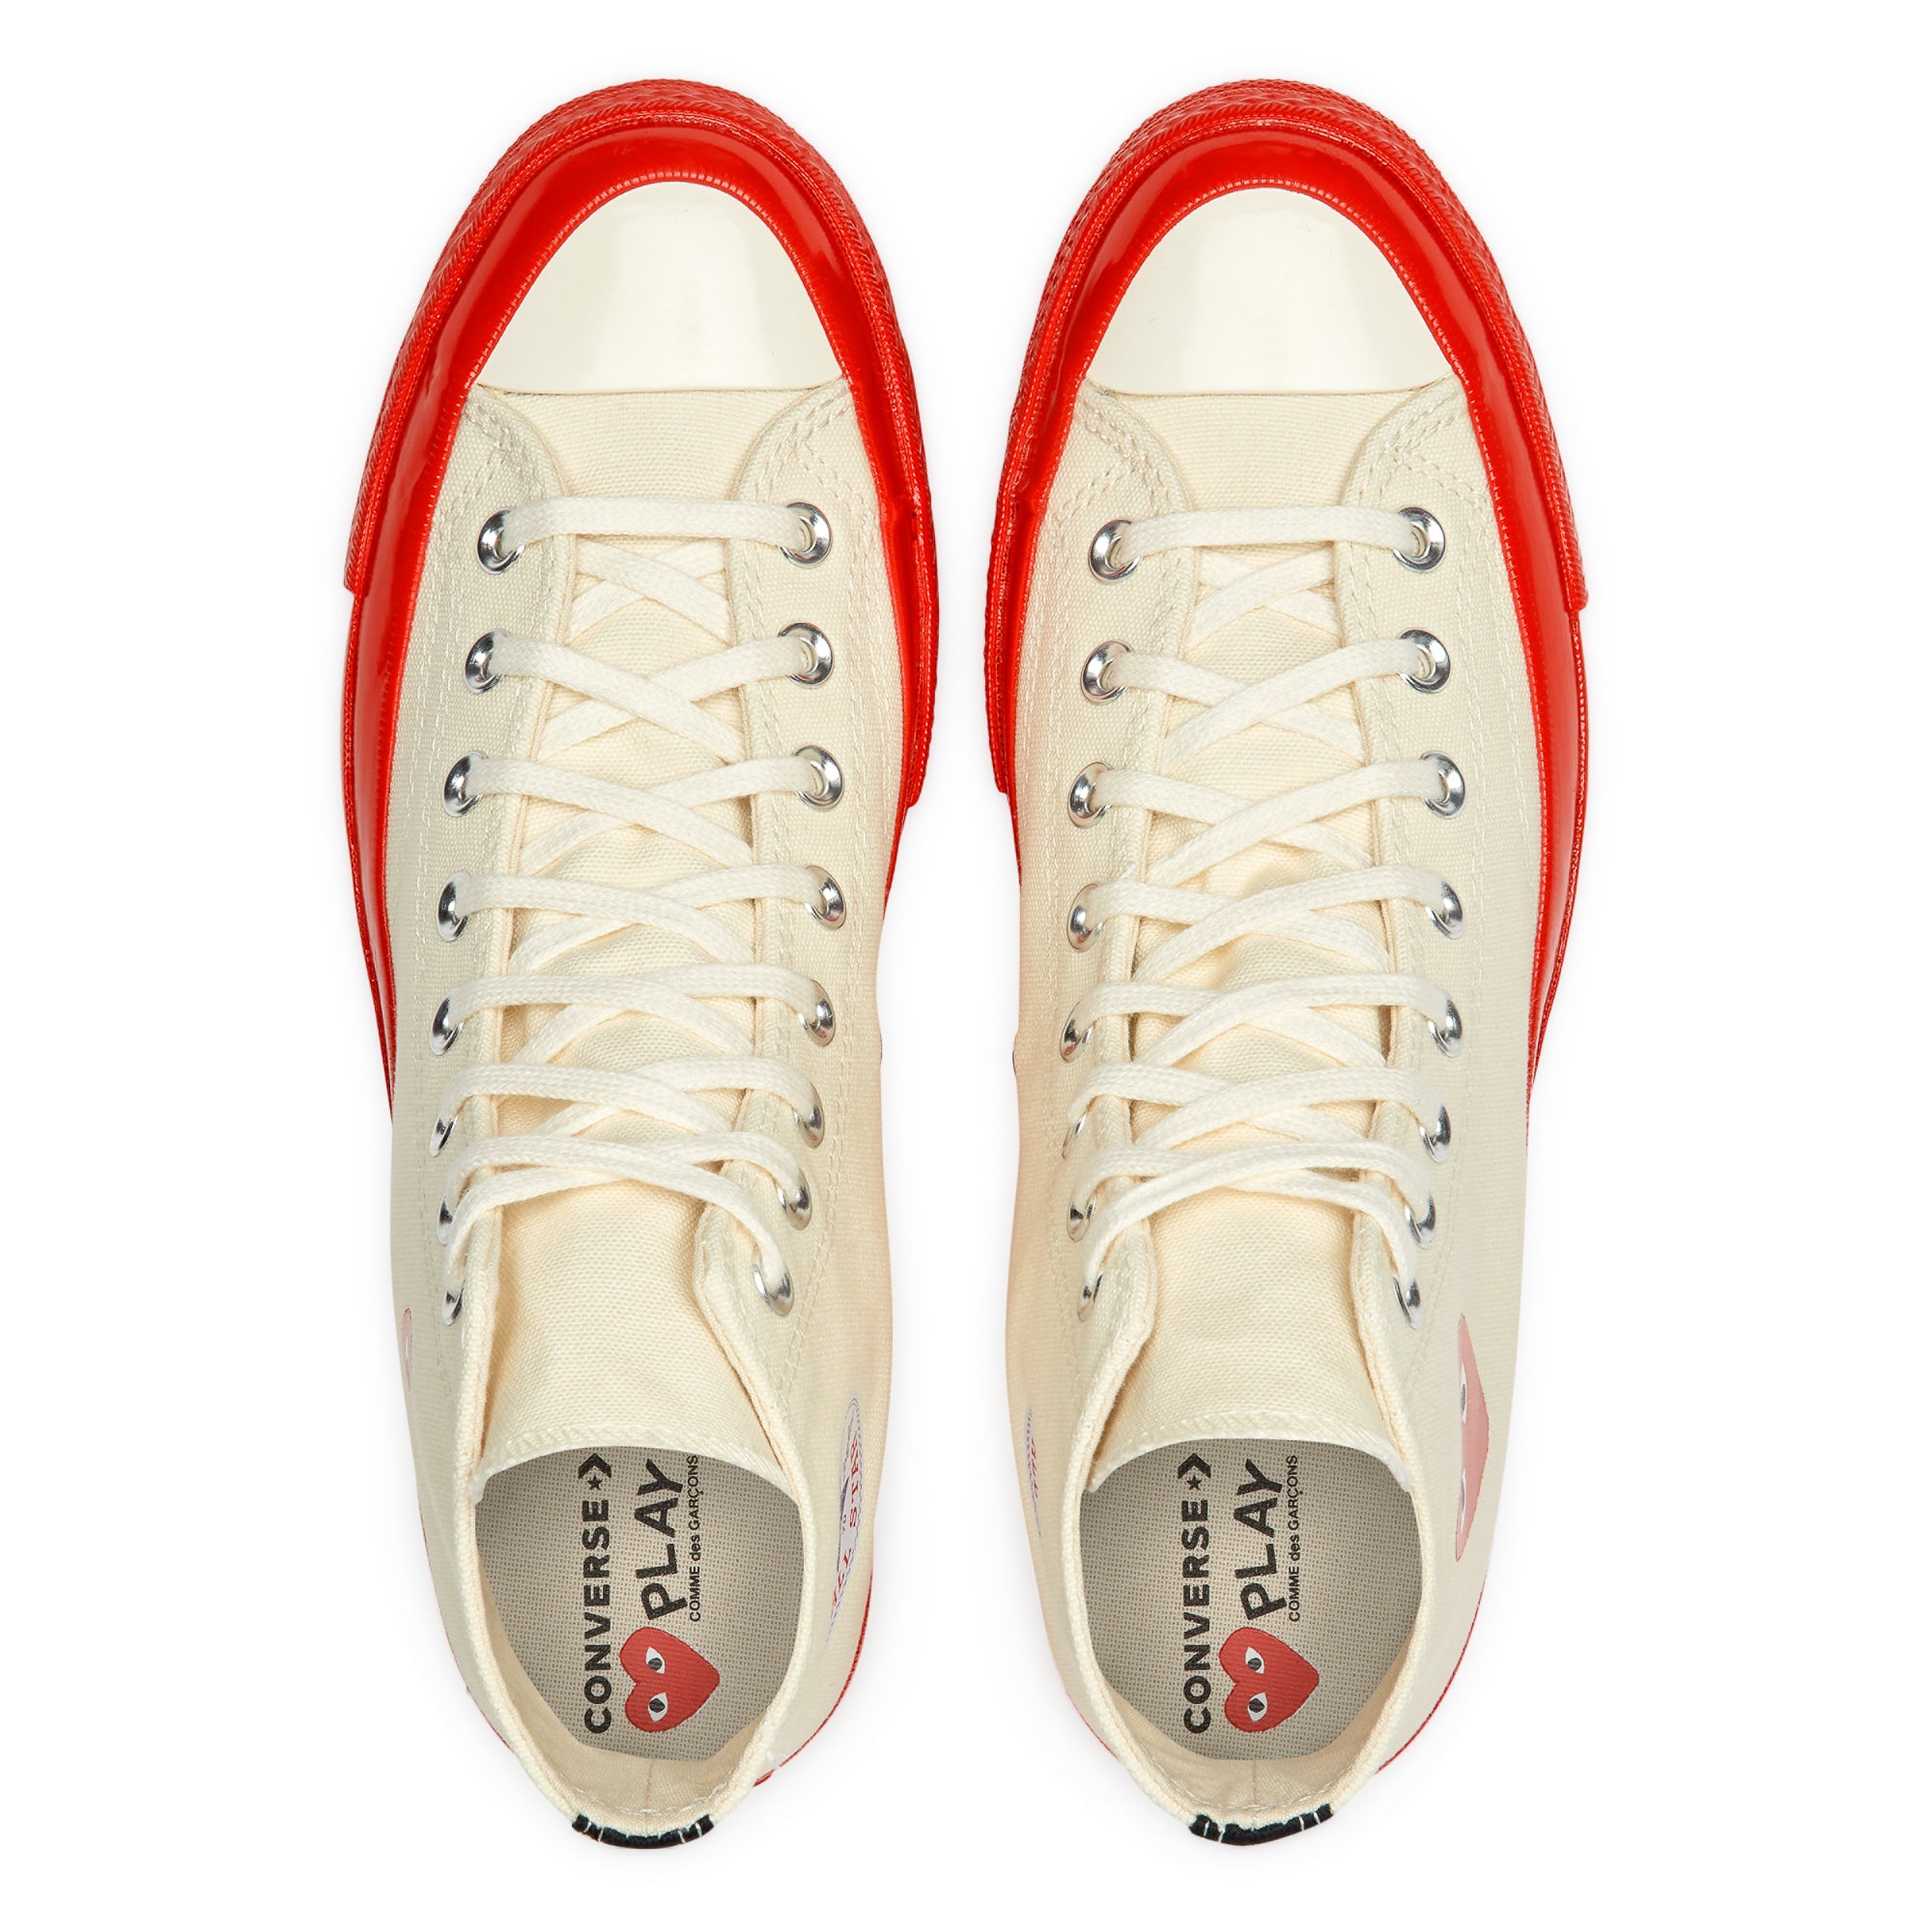 PLAY CONVERSE - Chuck 70 High Top - (Red/White) view 6